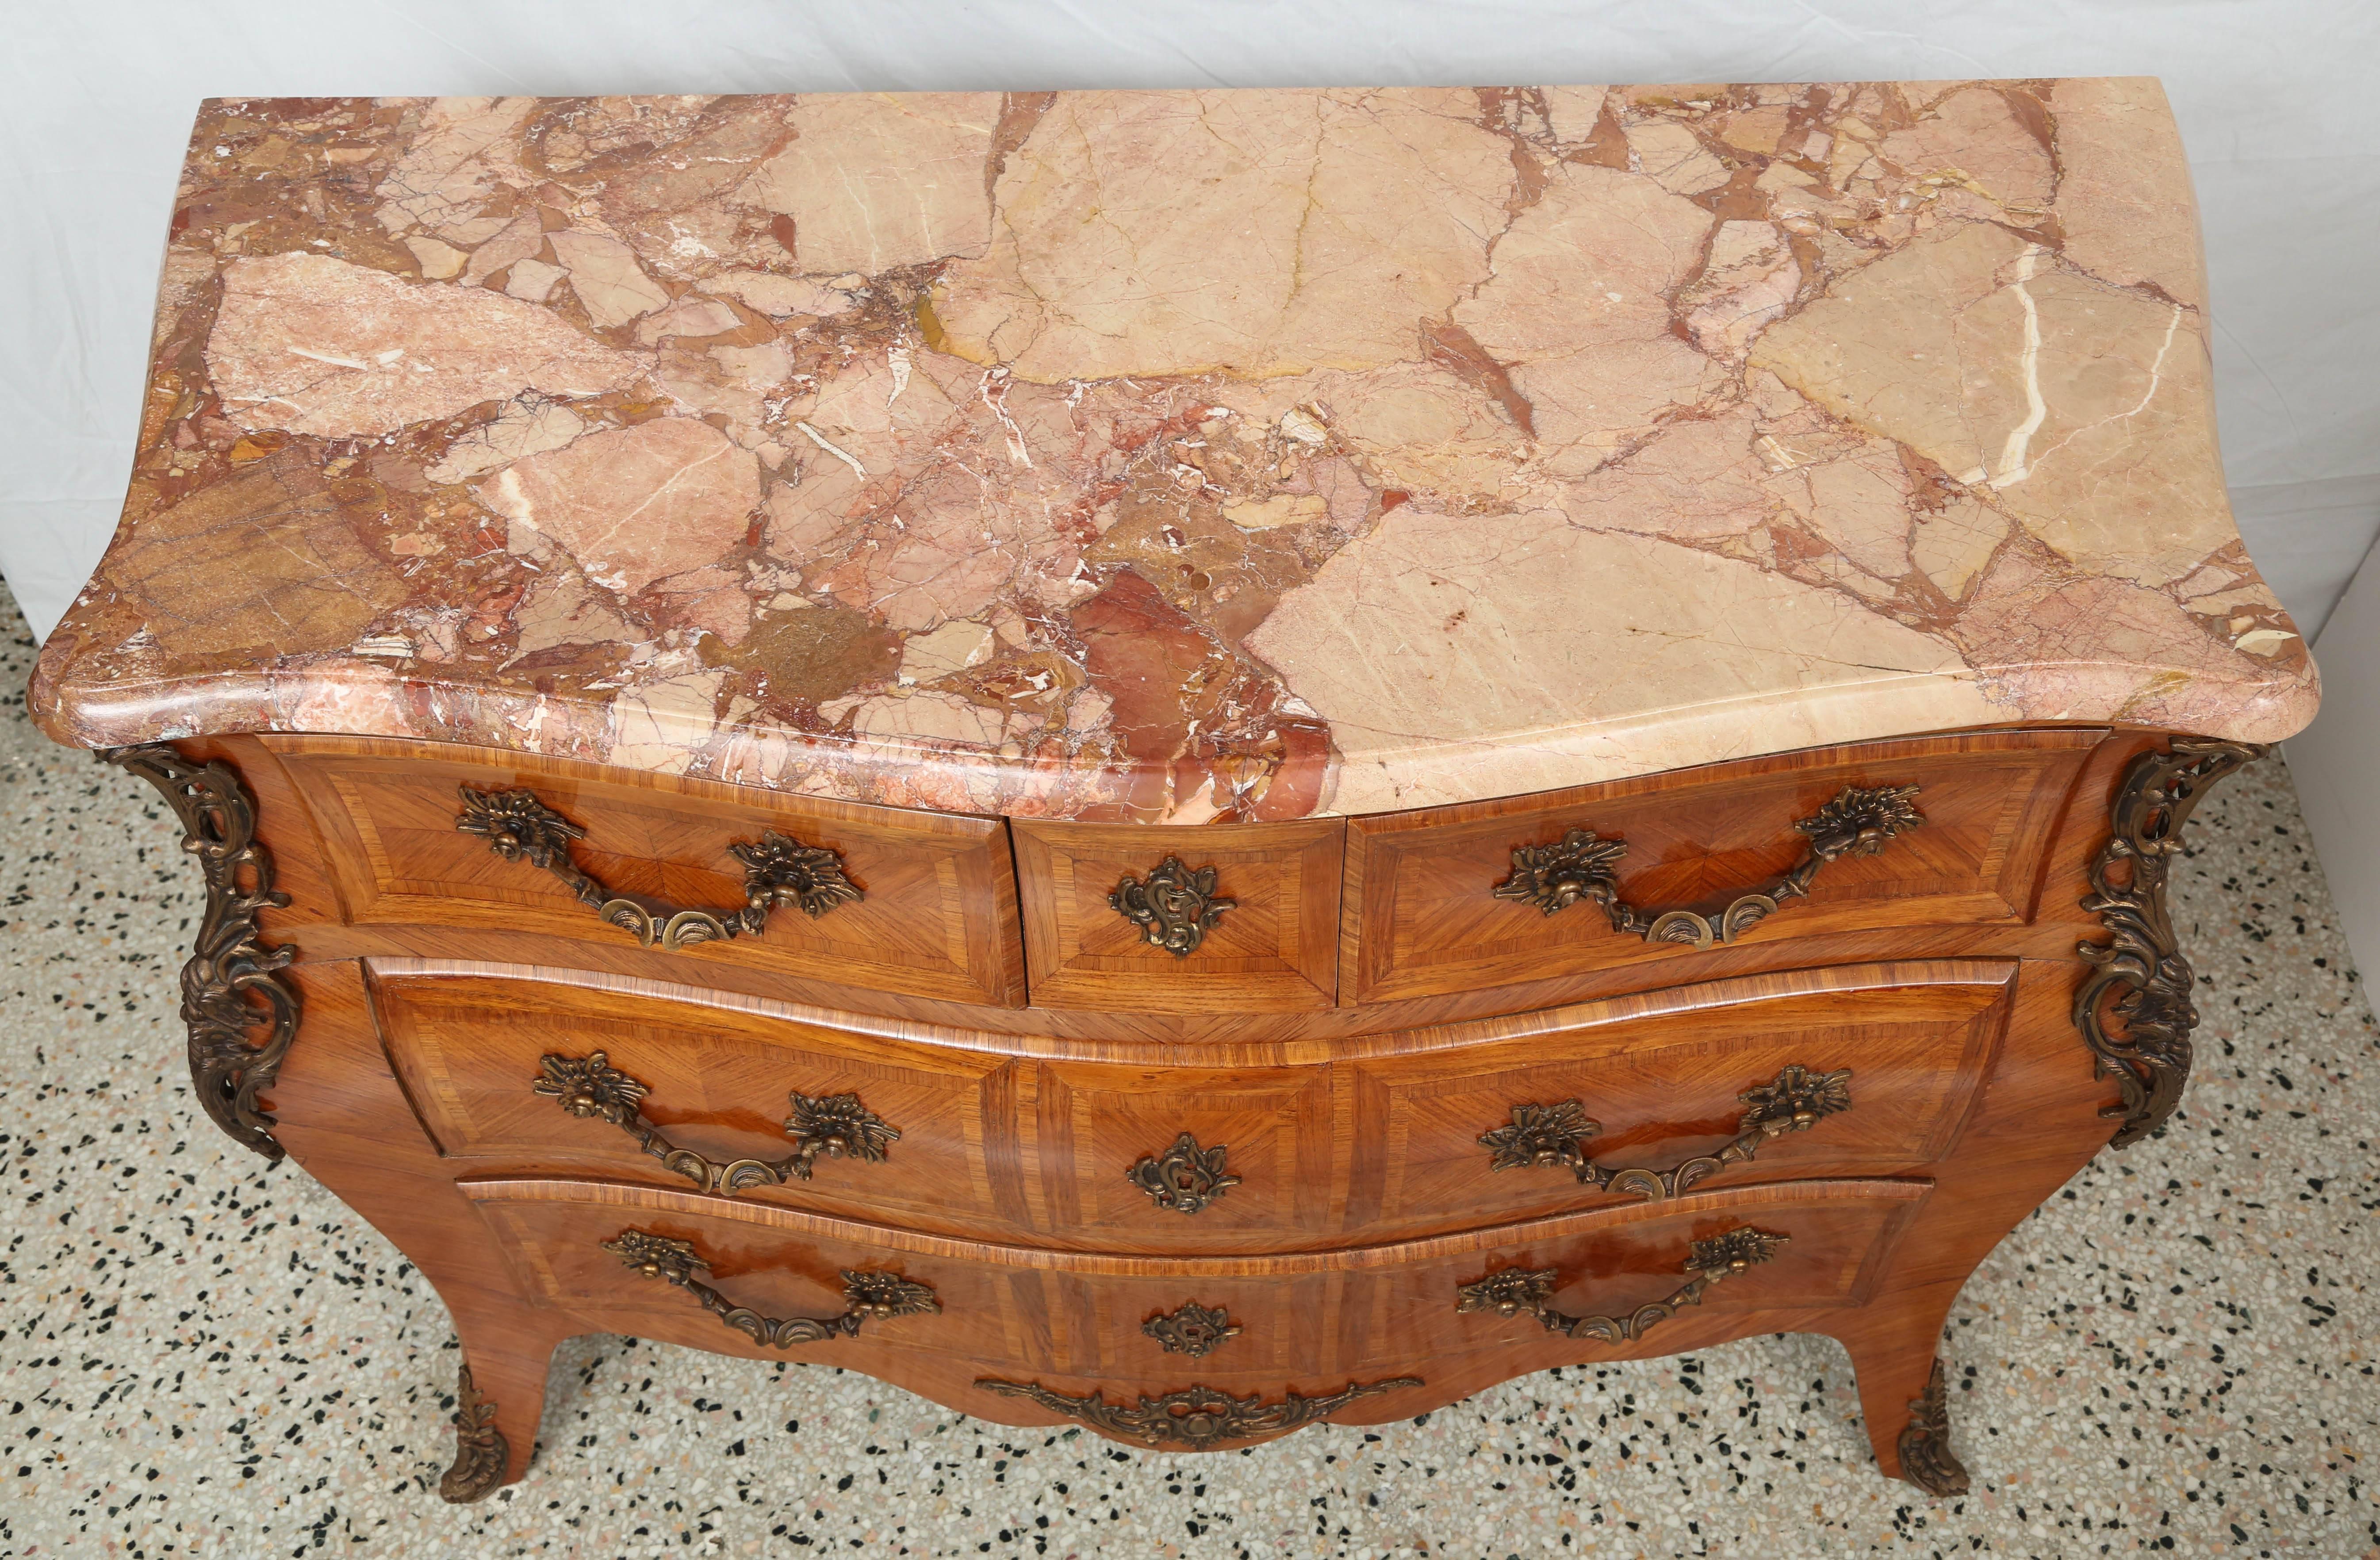 This beautiful Louis XV style commode was recently purchased in London and dates from the 1940s. The wood veneers are in a warm coloration which compliments the antiqued brass hardware. The marble top is variegated in colors of rose and